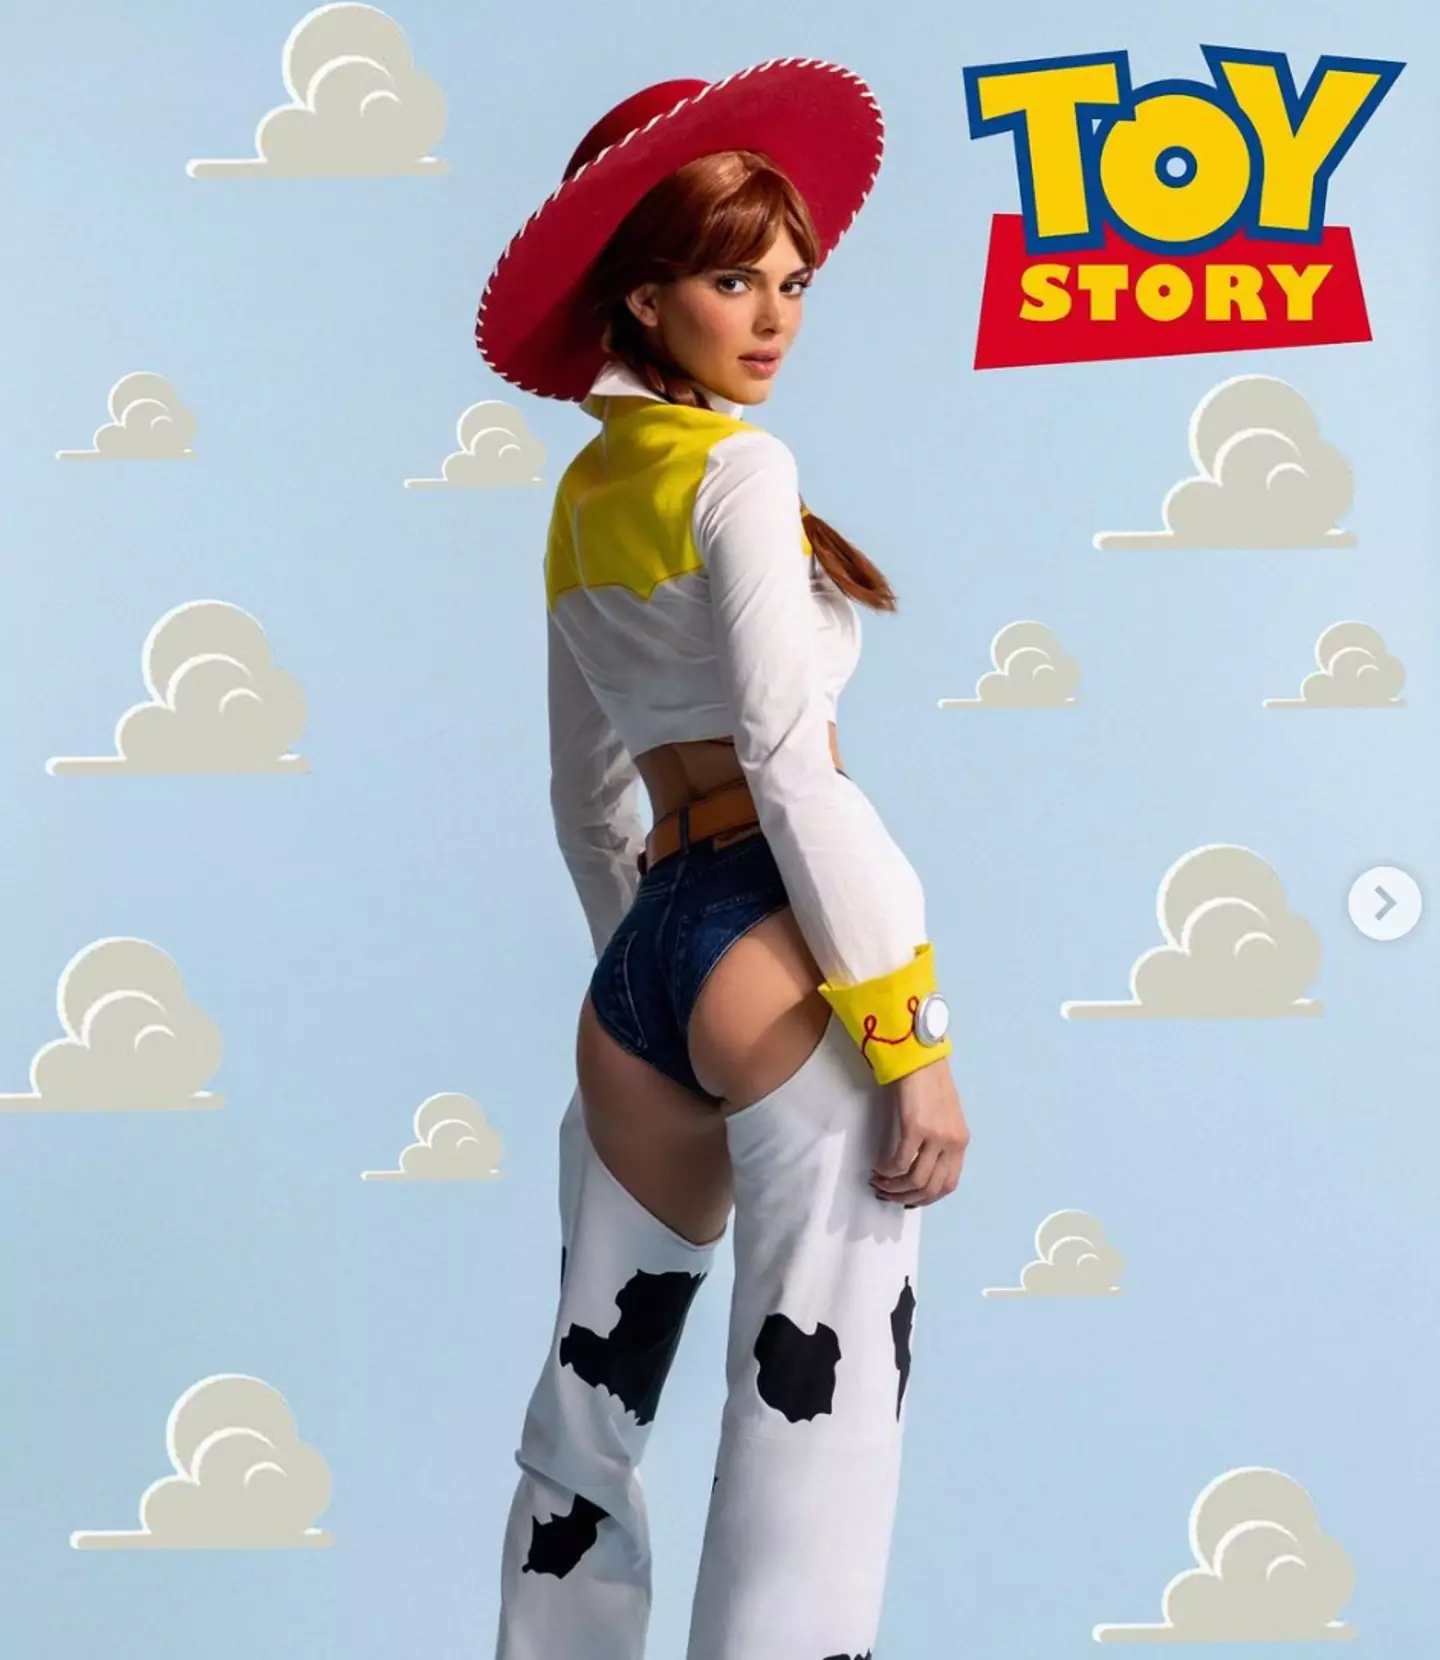 Kendall wore a Toy Story inspired costume.